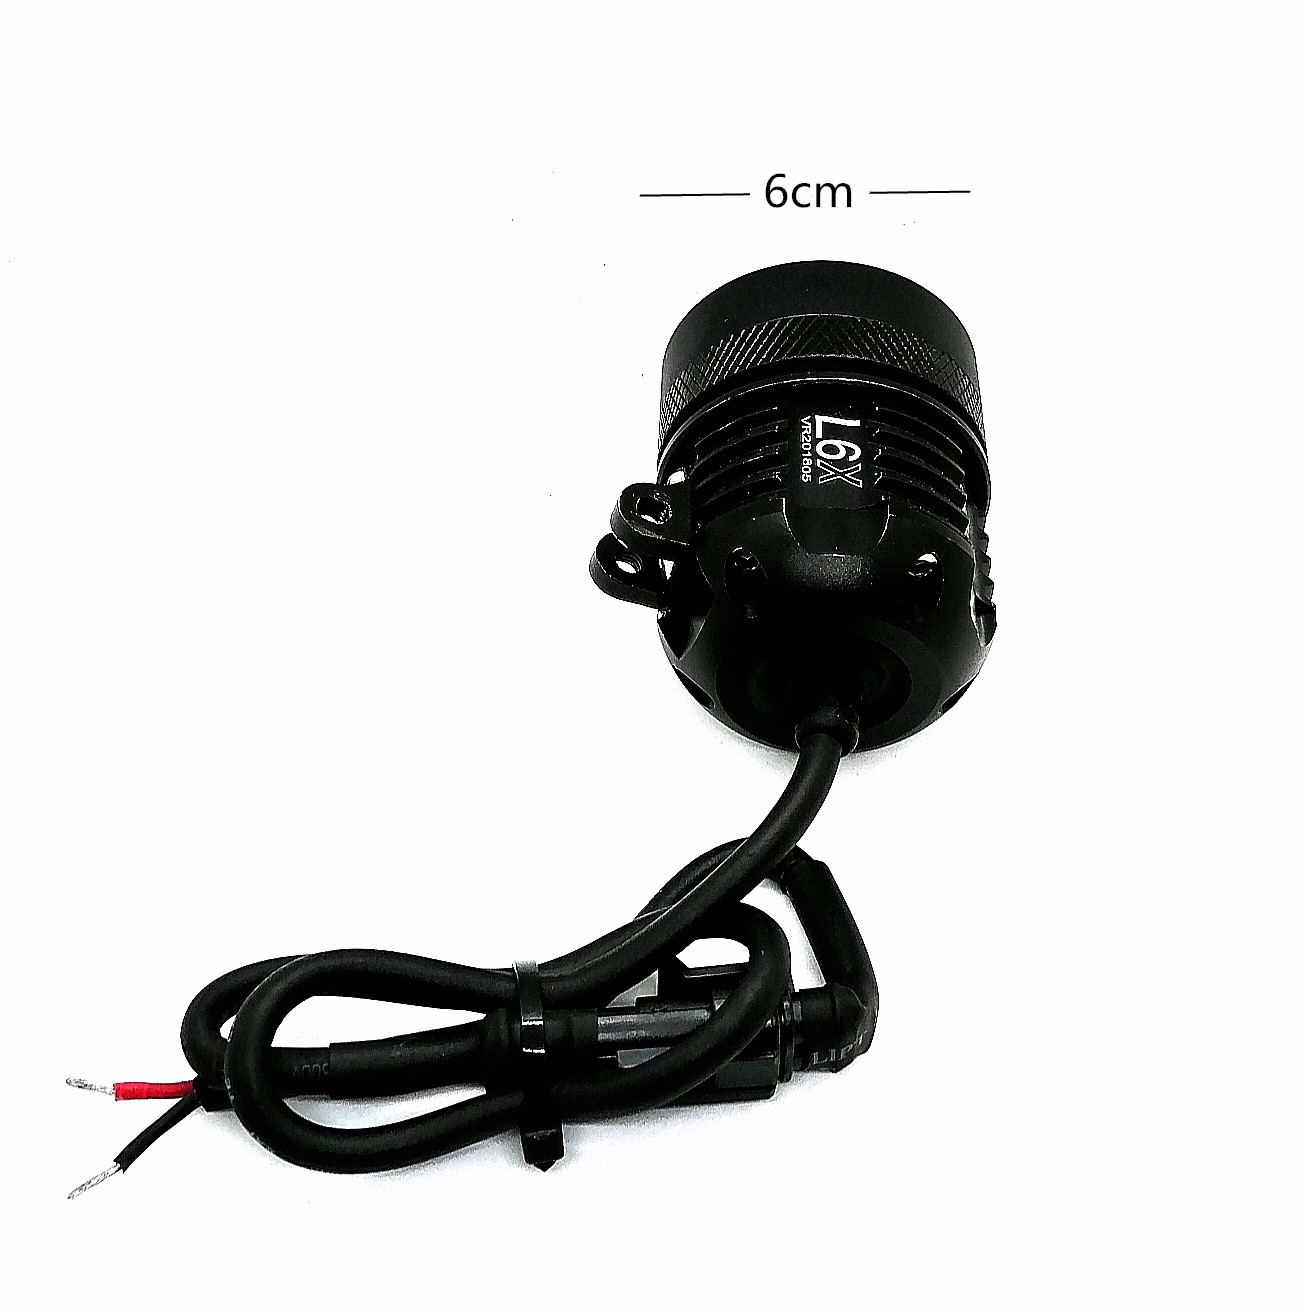 Motorcycle Led Driving Lighting System